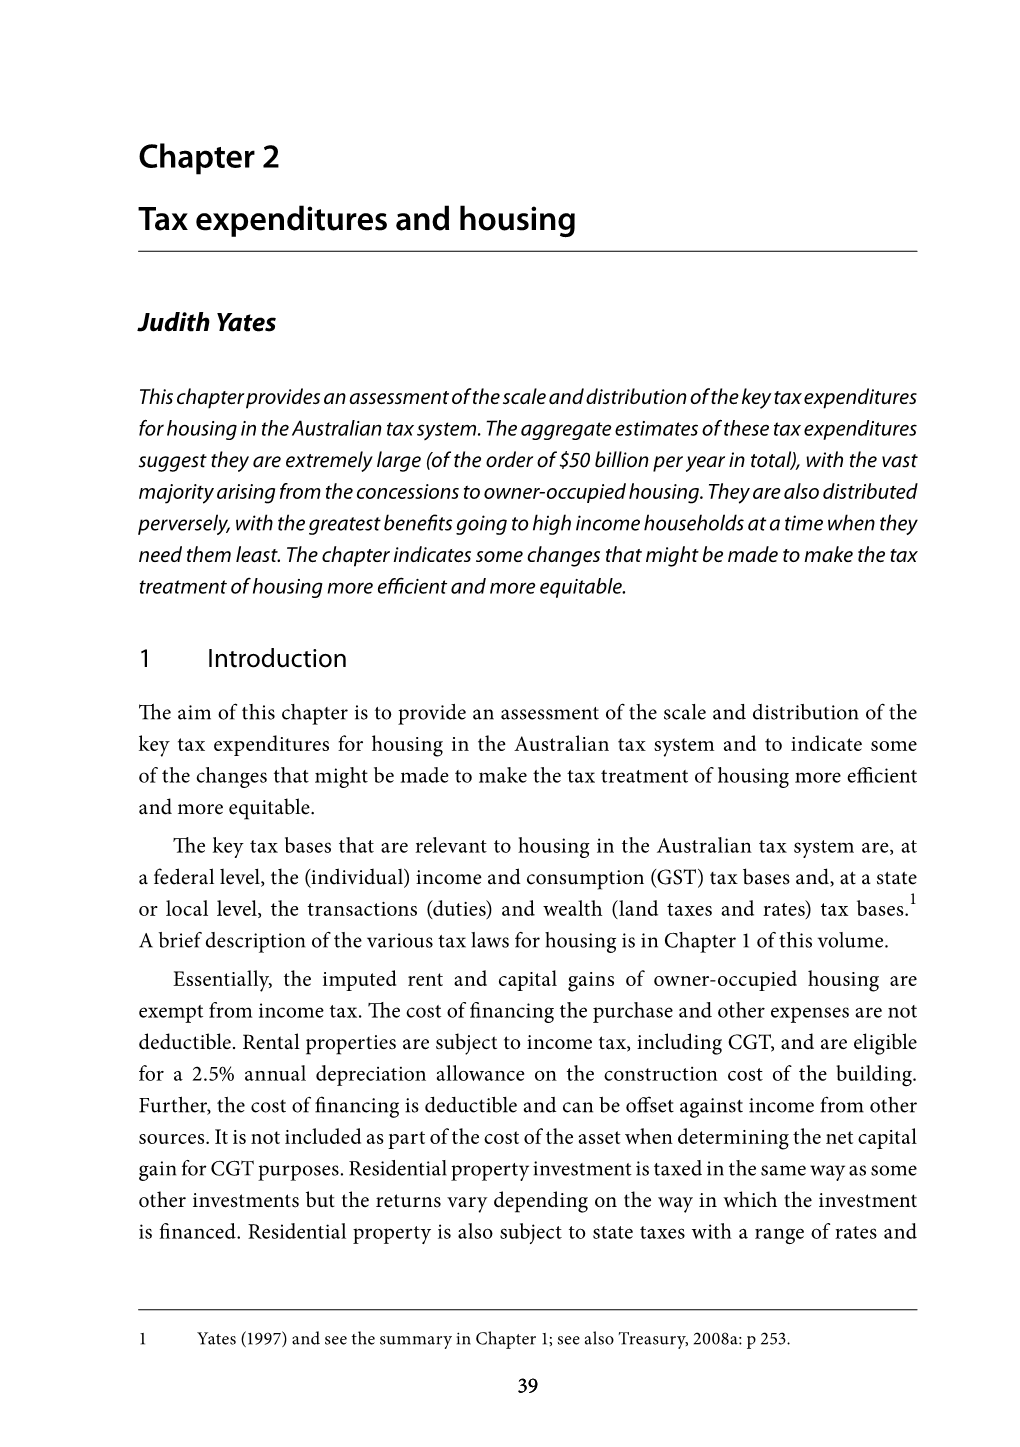 Chapter 2 Tax Expenditures and Housing